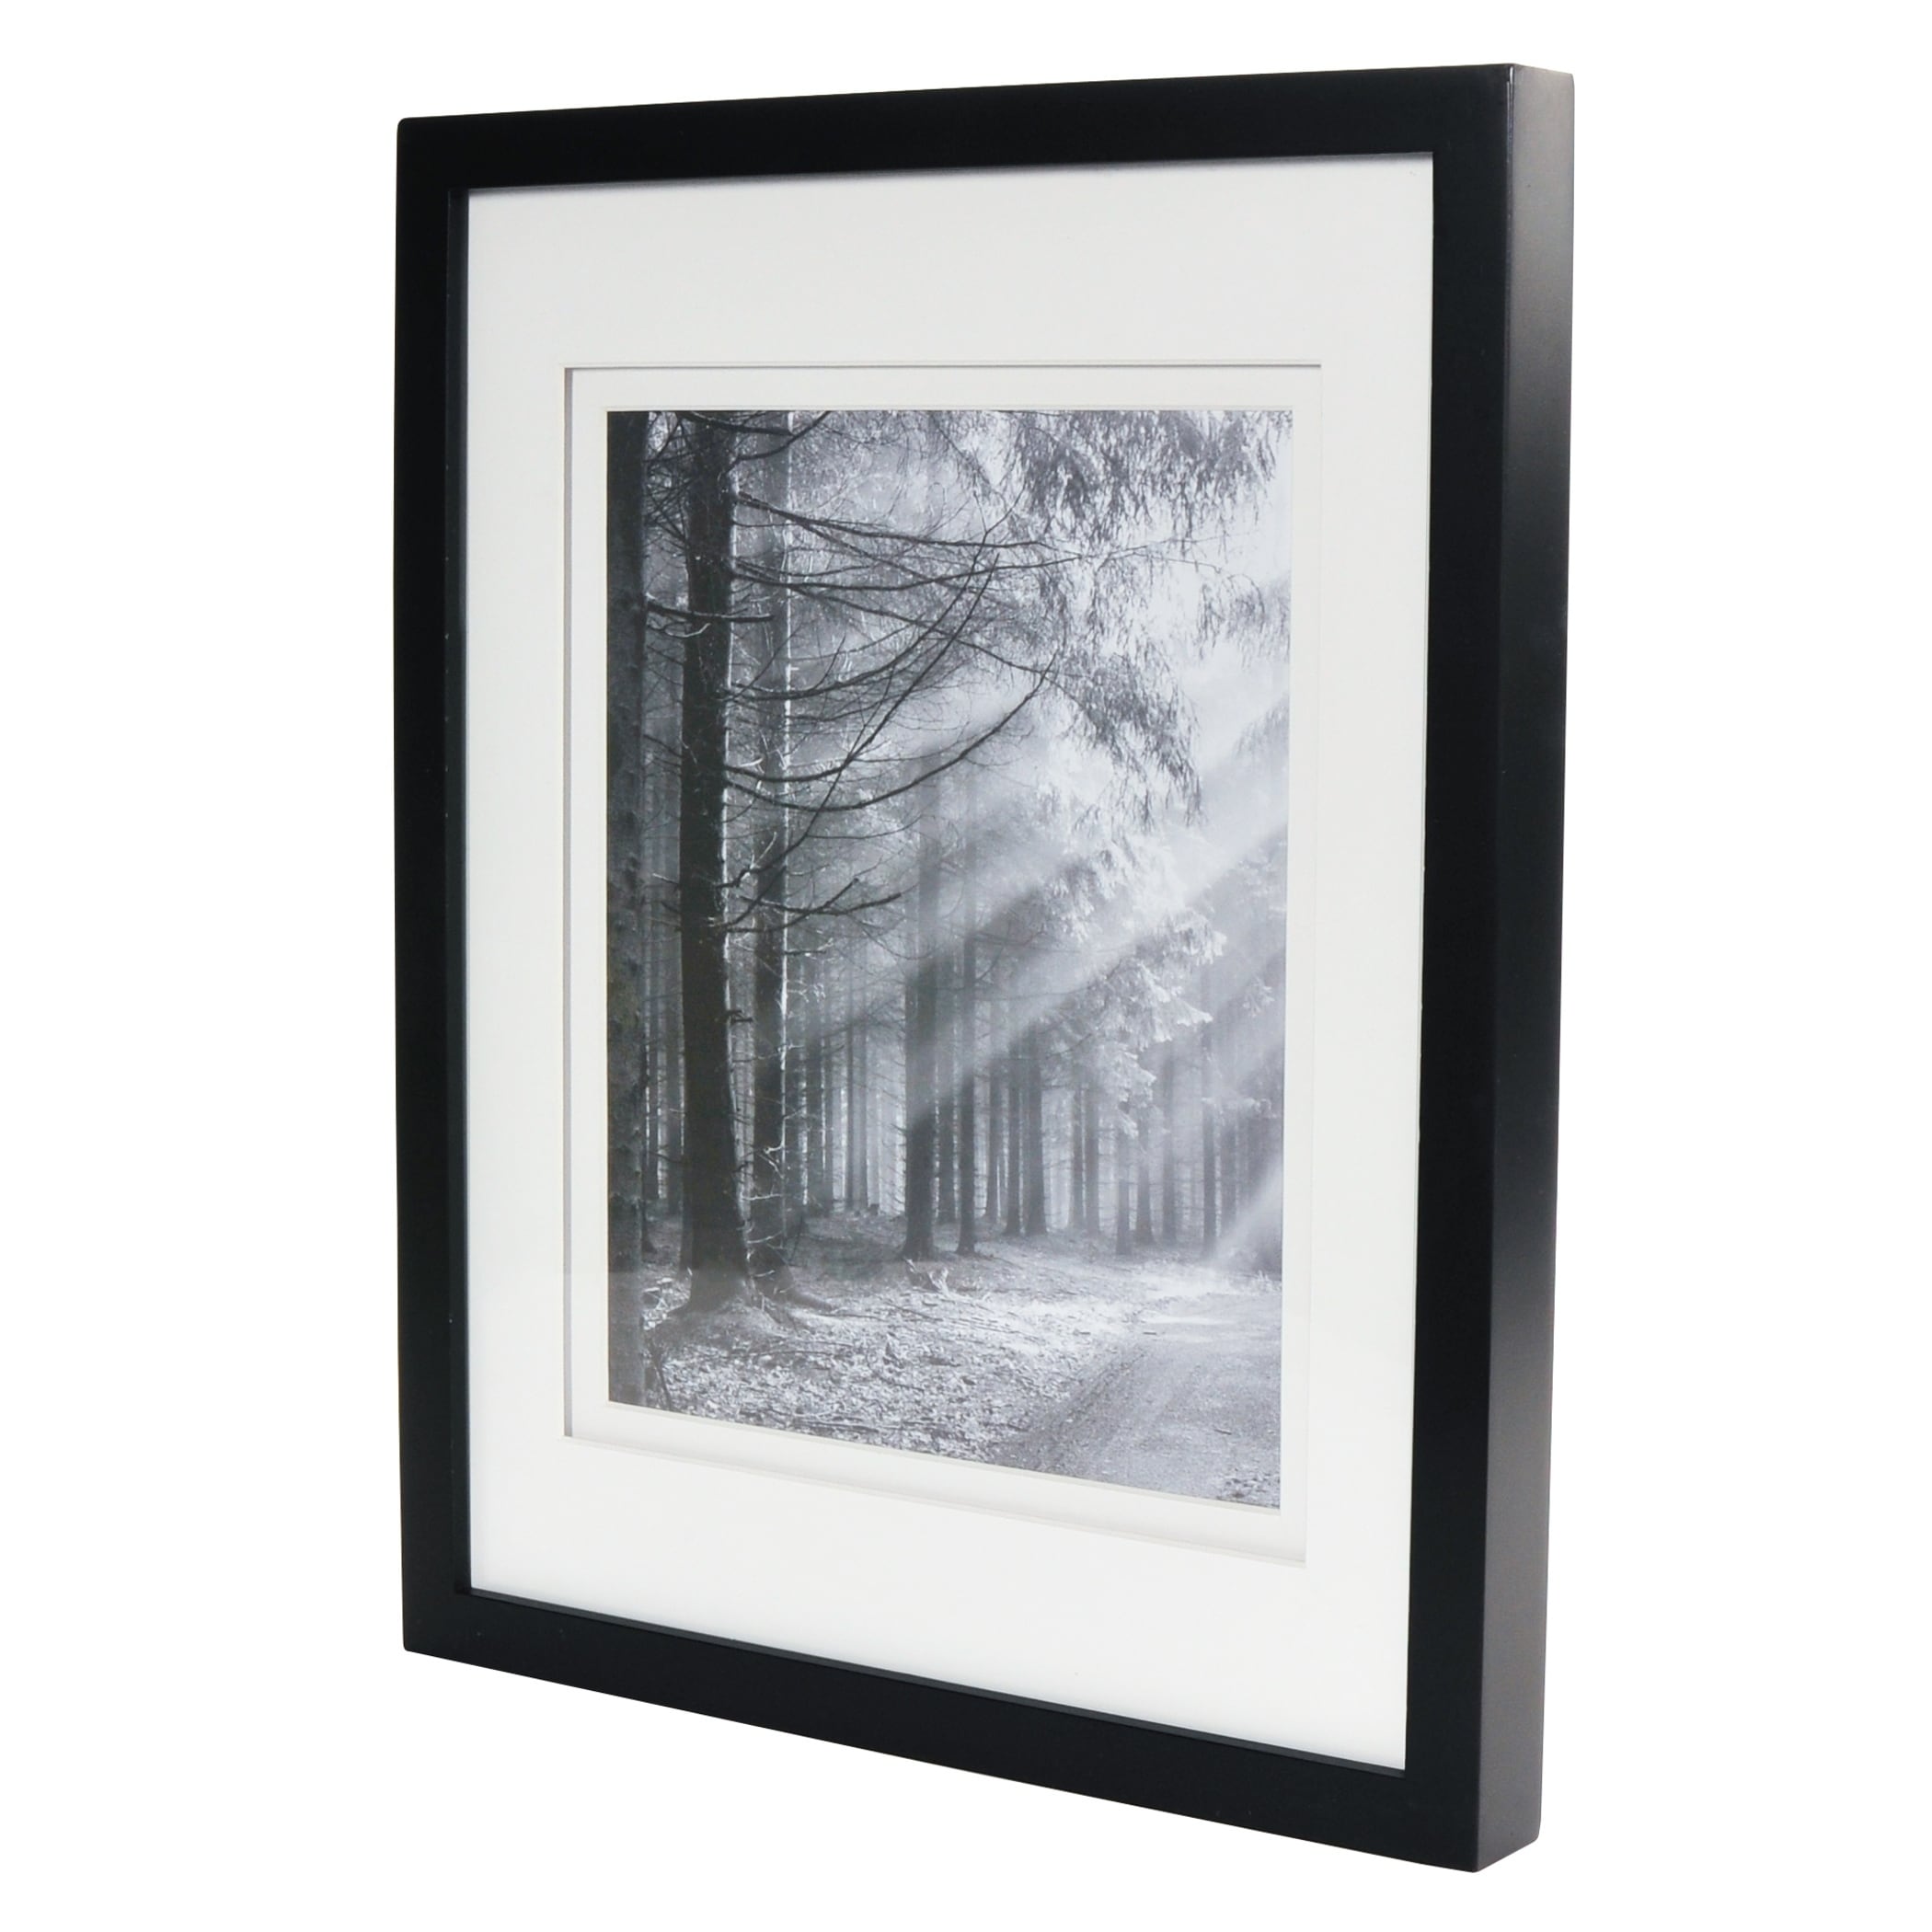 picture frame that holds 3 8x10 photos